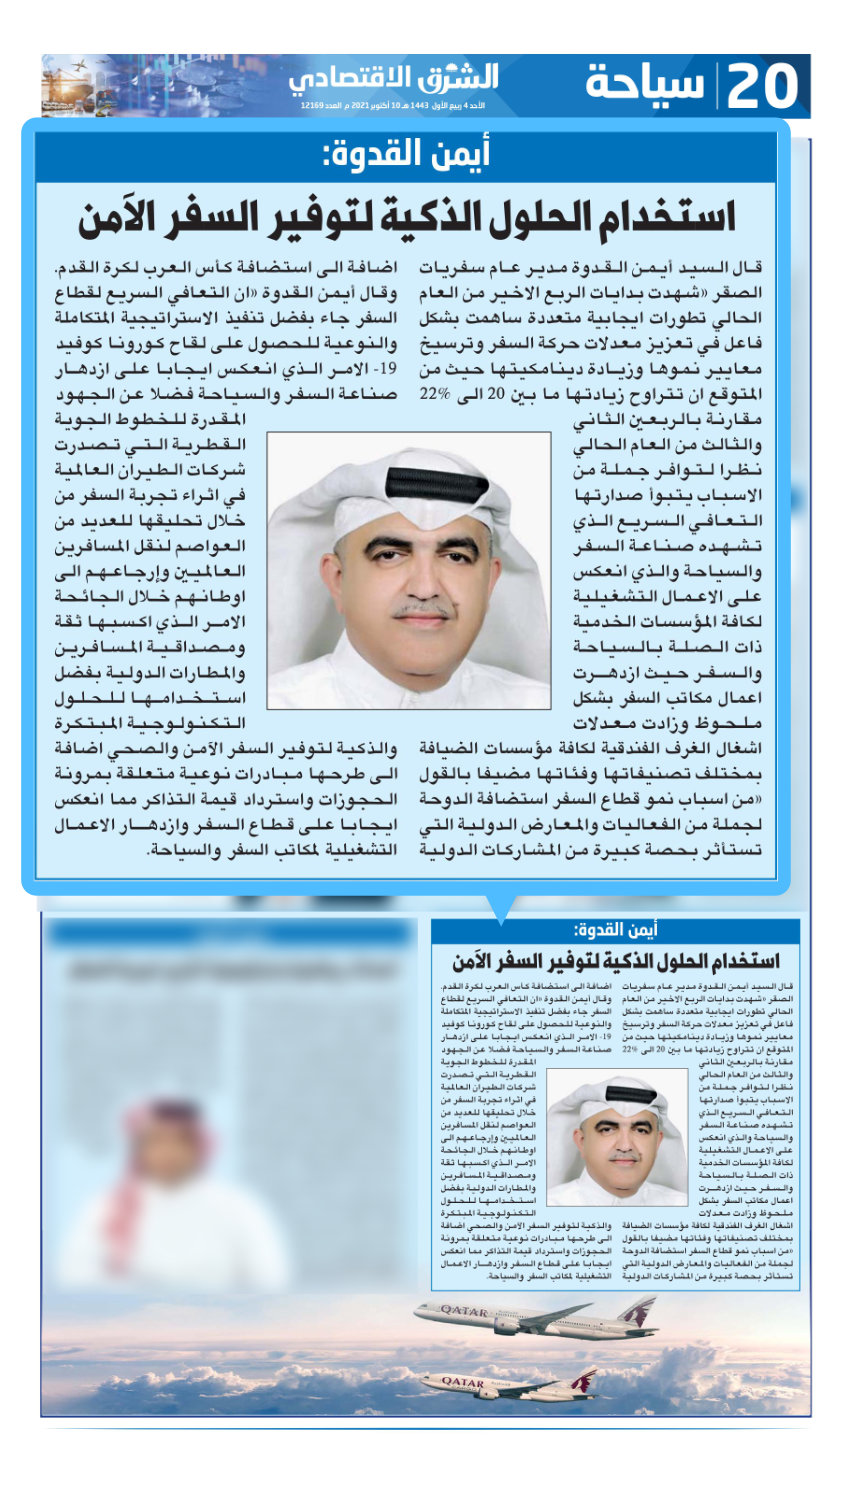 Ayman Al Qudwa: Using Smart Solutions to Provide Safe Travel